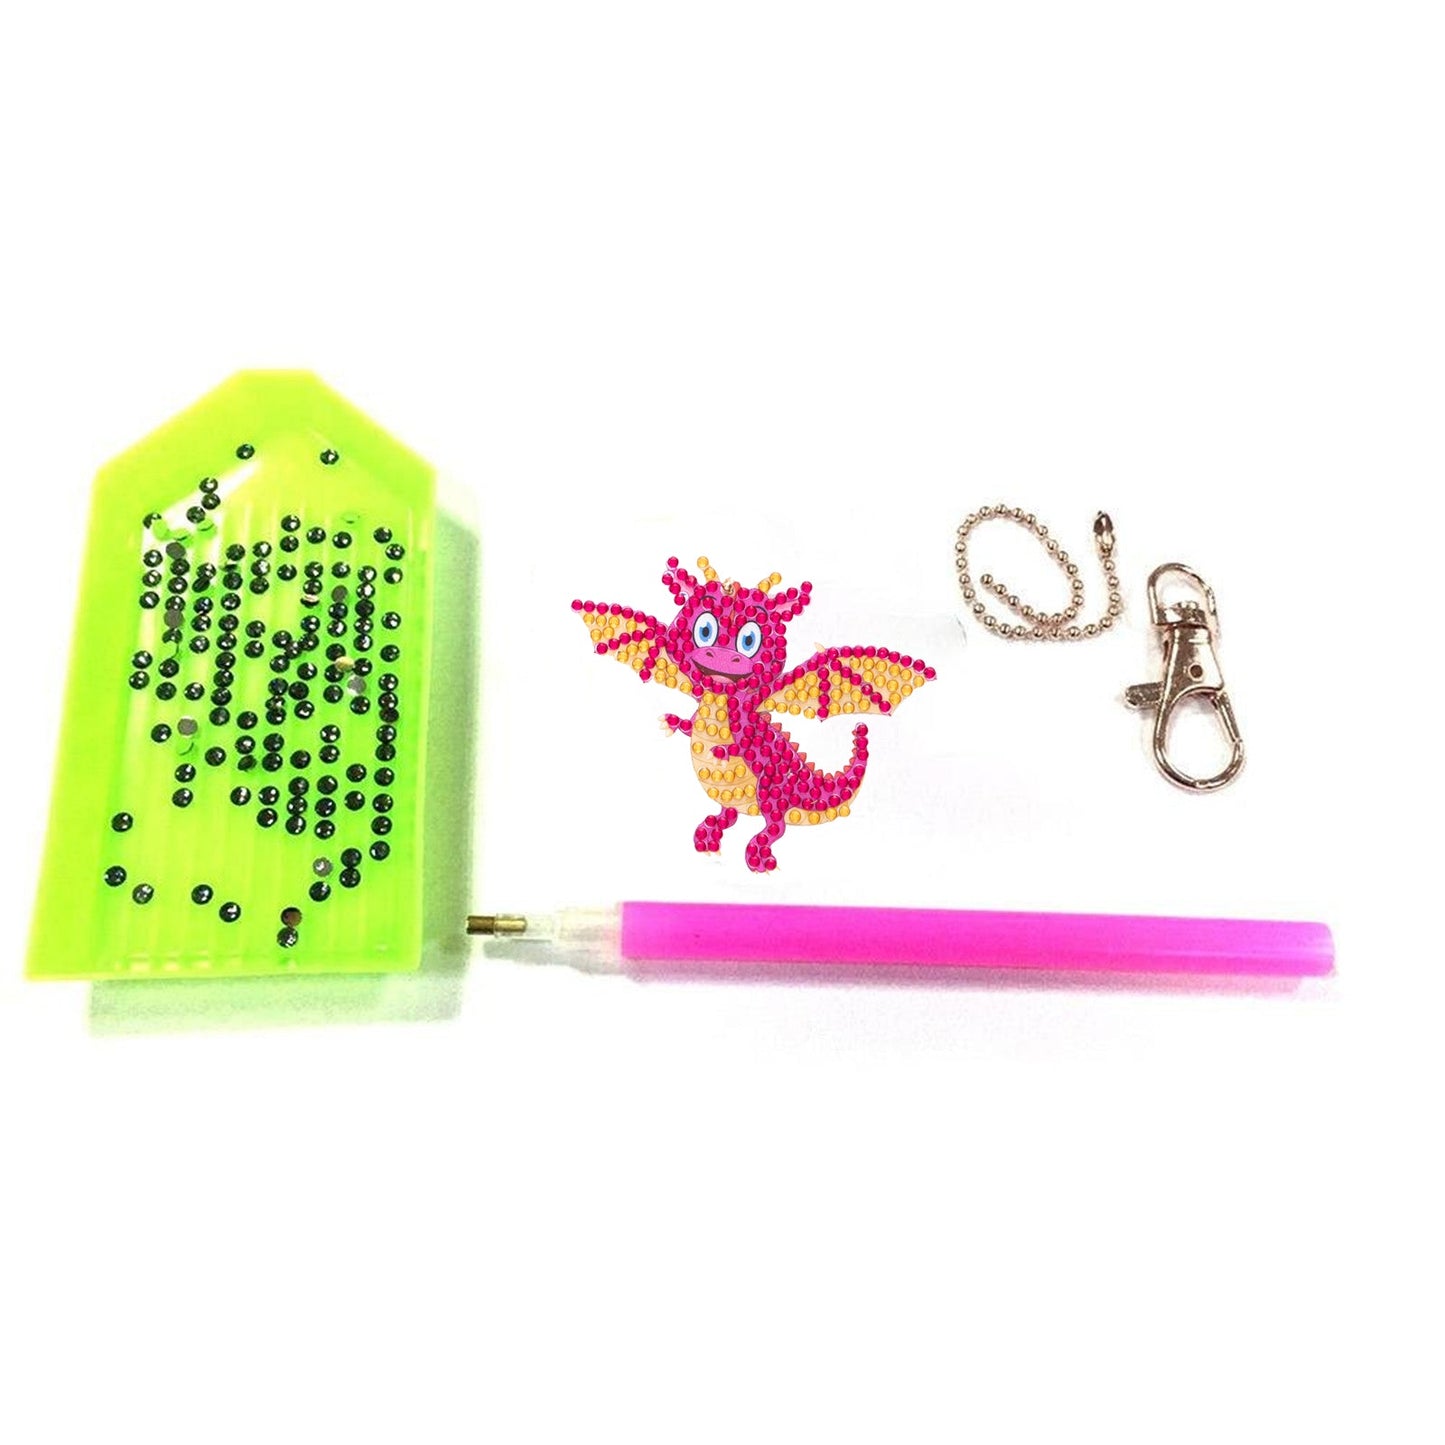 Baby Dragons - Diamond Painting Keychains